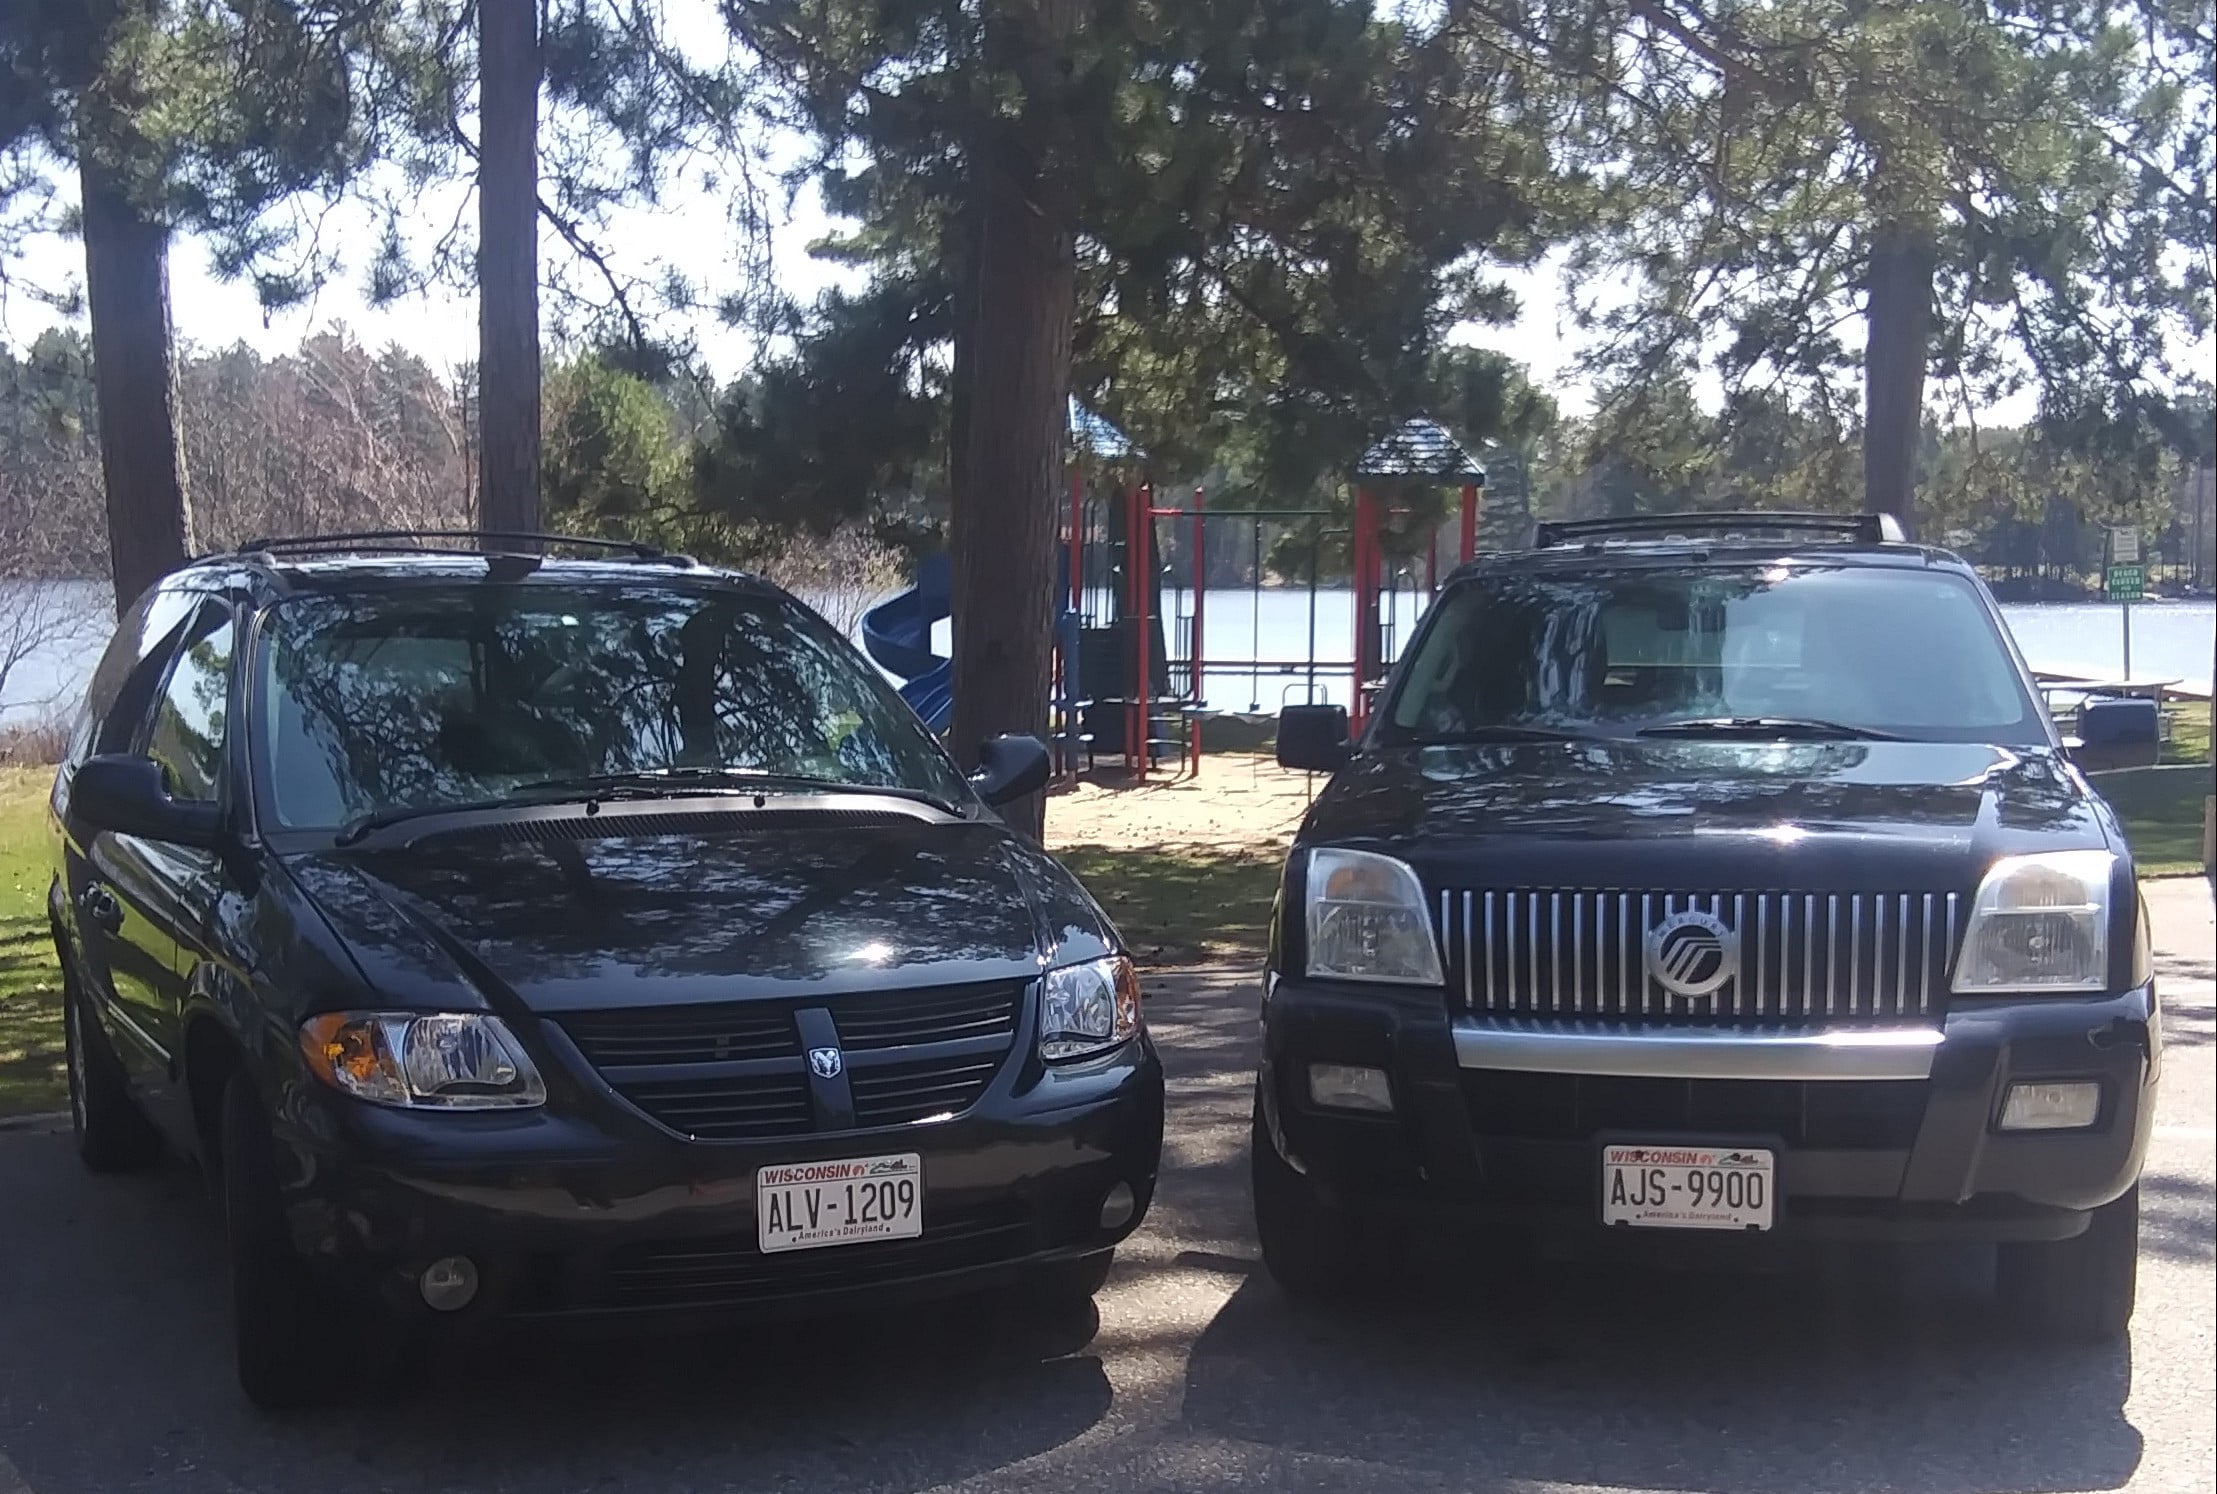 Allison’s Bar Car Vs. Eagle River Taxi: Who Does What?